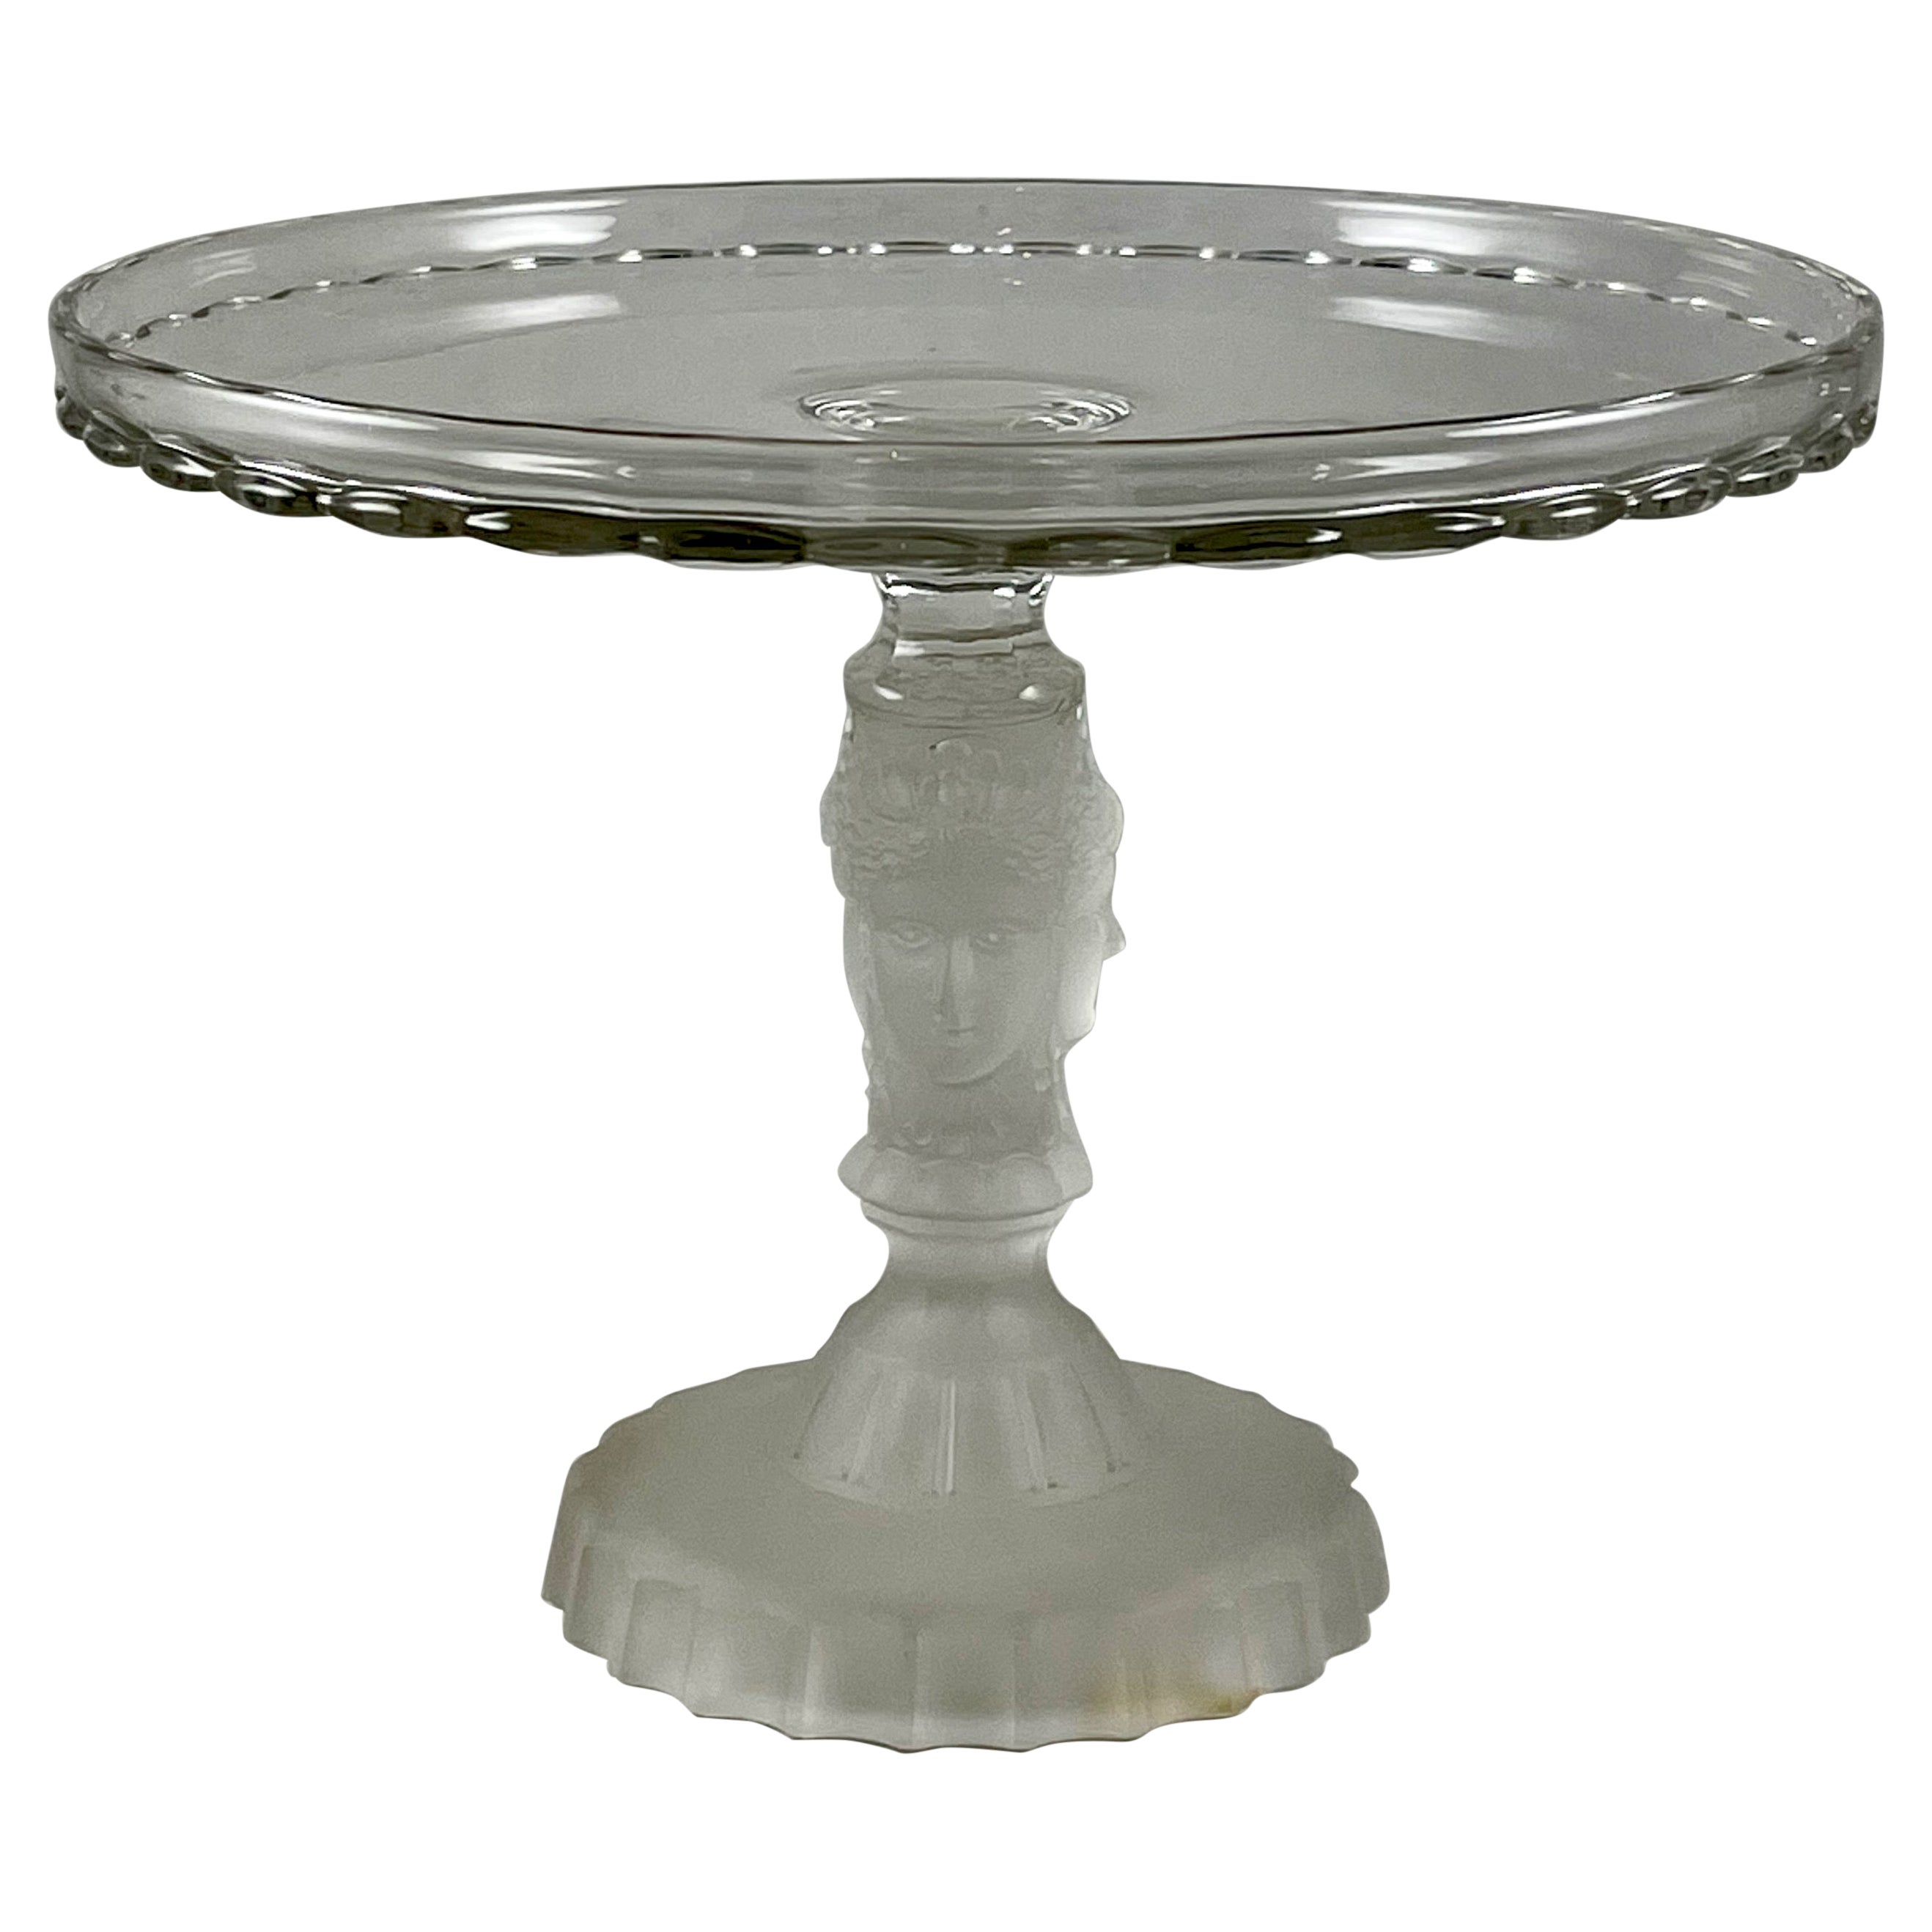 Duncan Miller Three Face Early American Pressed Glass Cake Stand, circa 1890 